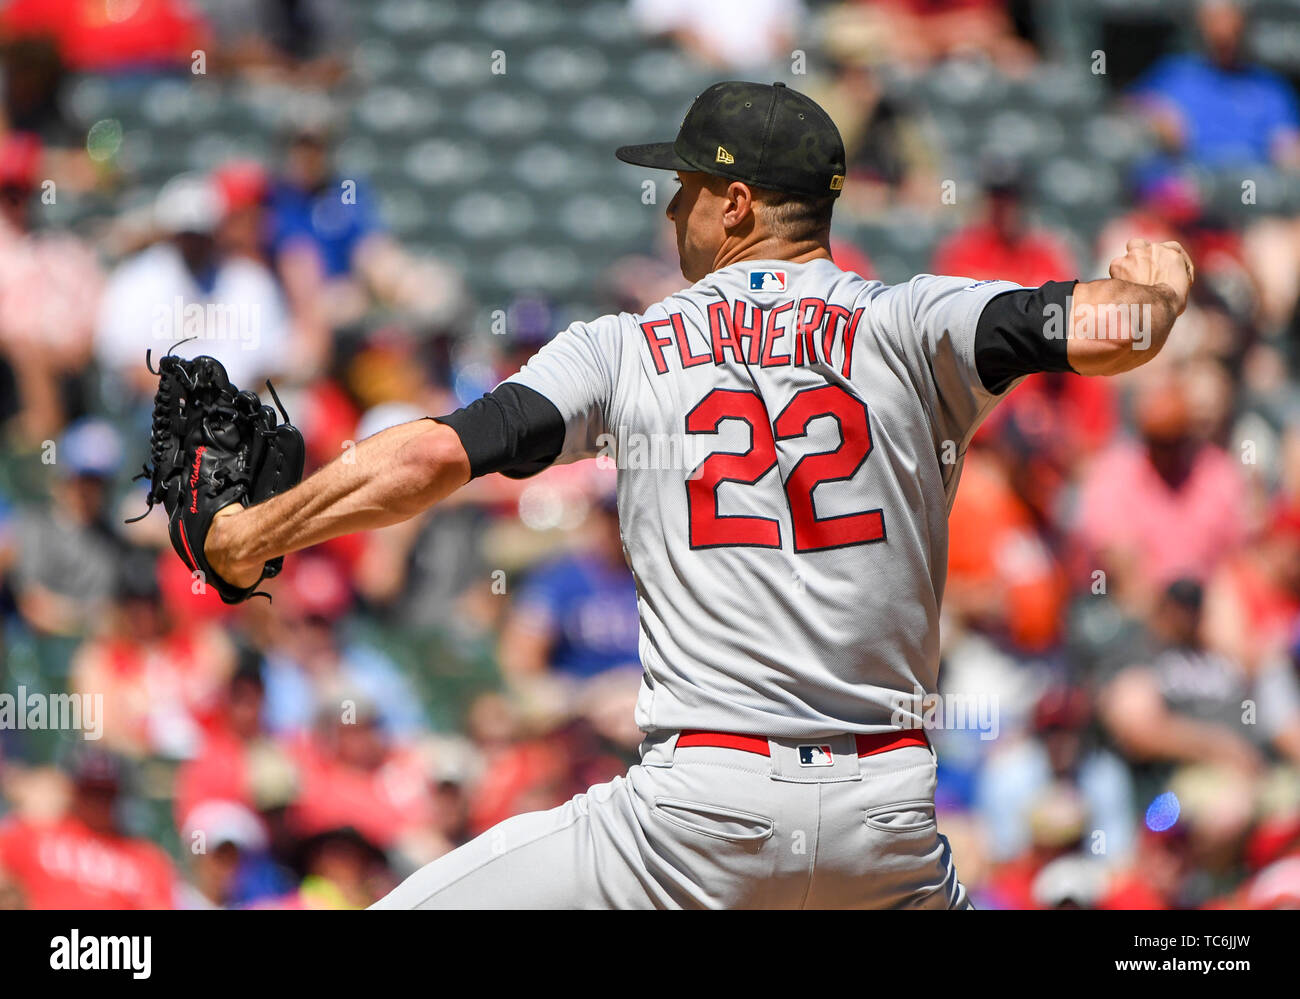 1,706 Jack Flaherty Photos & High Res Pictures - Getty Images